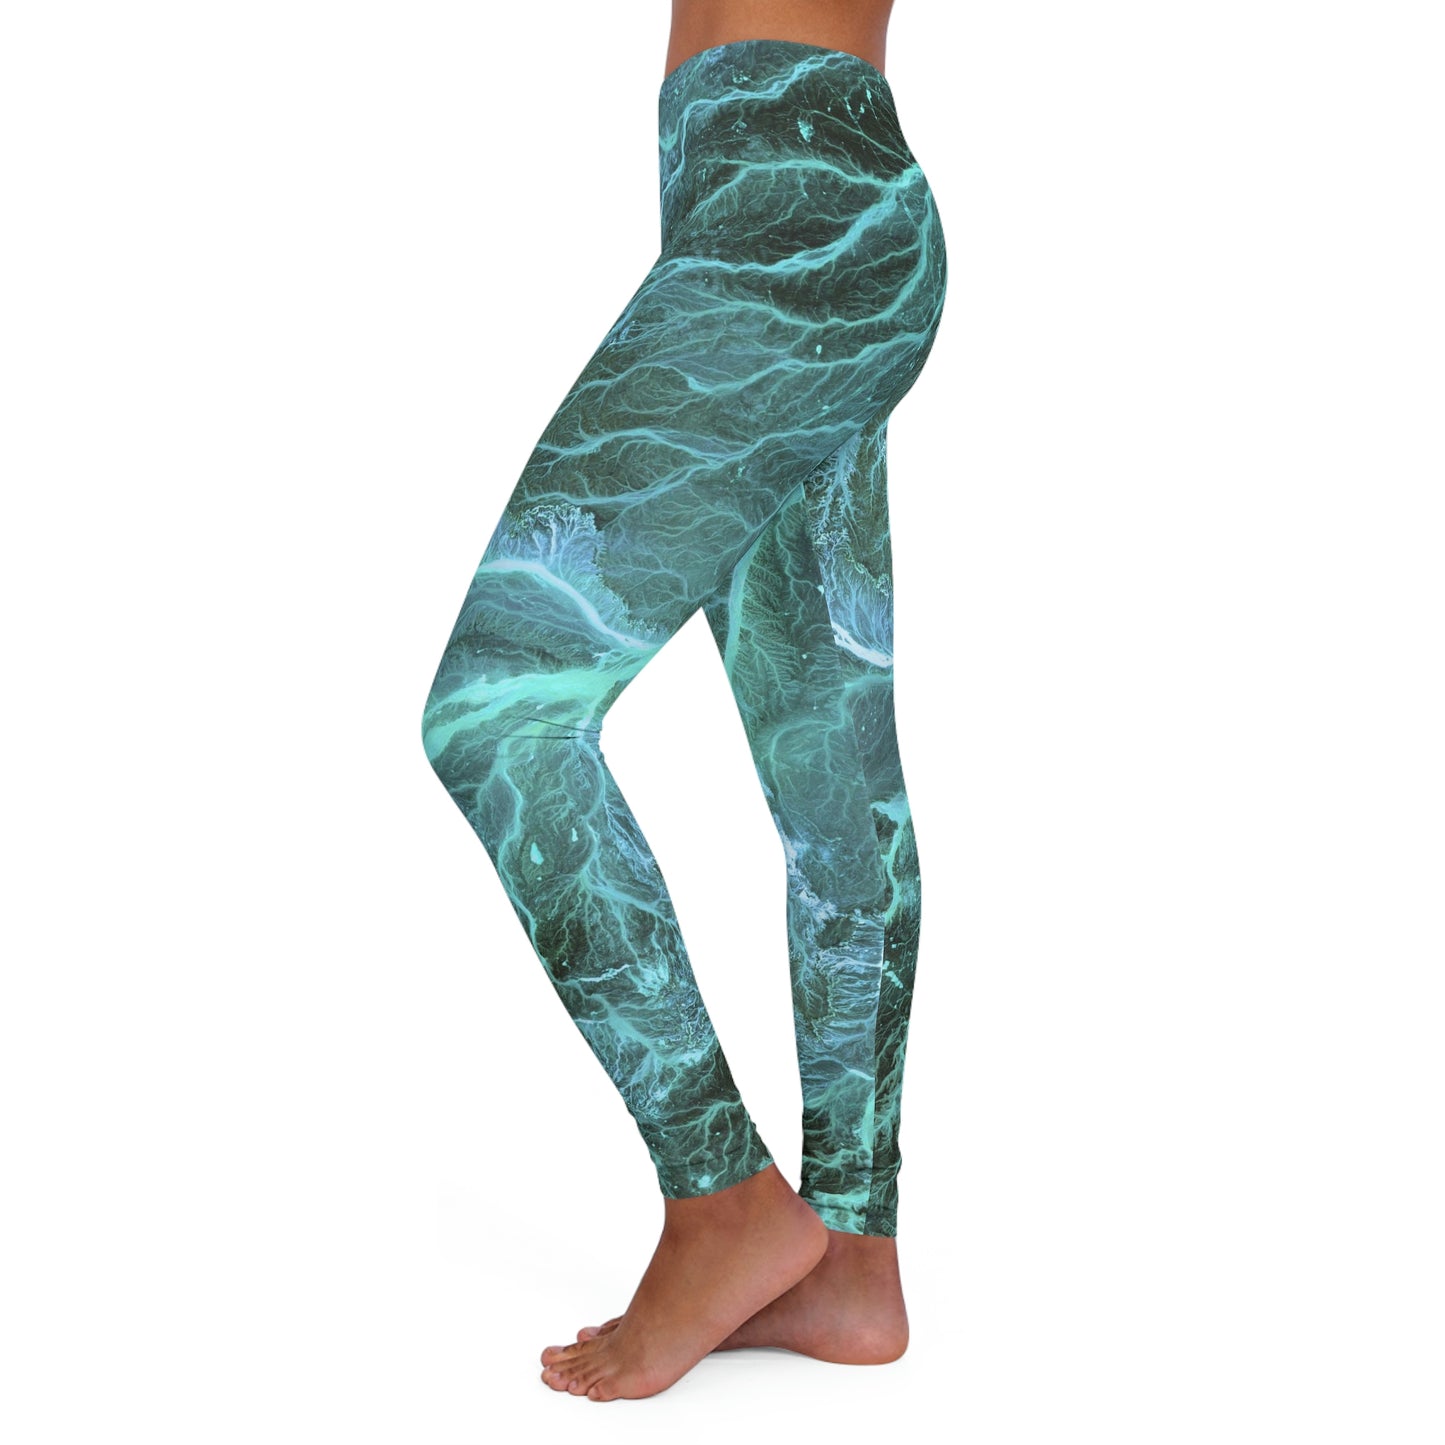 Night lights Galaxy Plus Size Leggings One of a Kind Gift - Unique Workout Activewear tights for Mom fitness, Mothers Day, Girlfriend Christmas